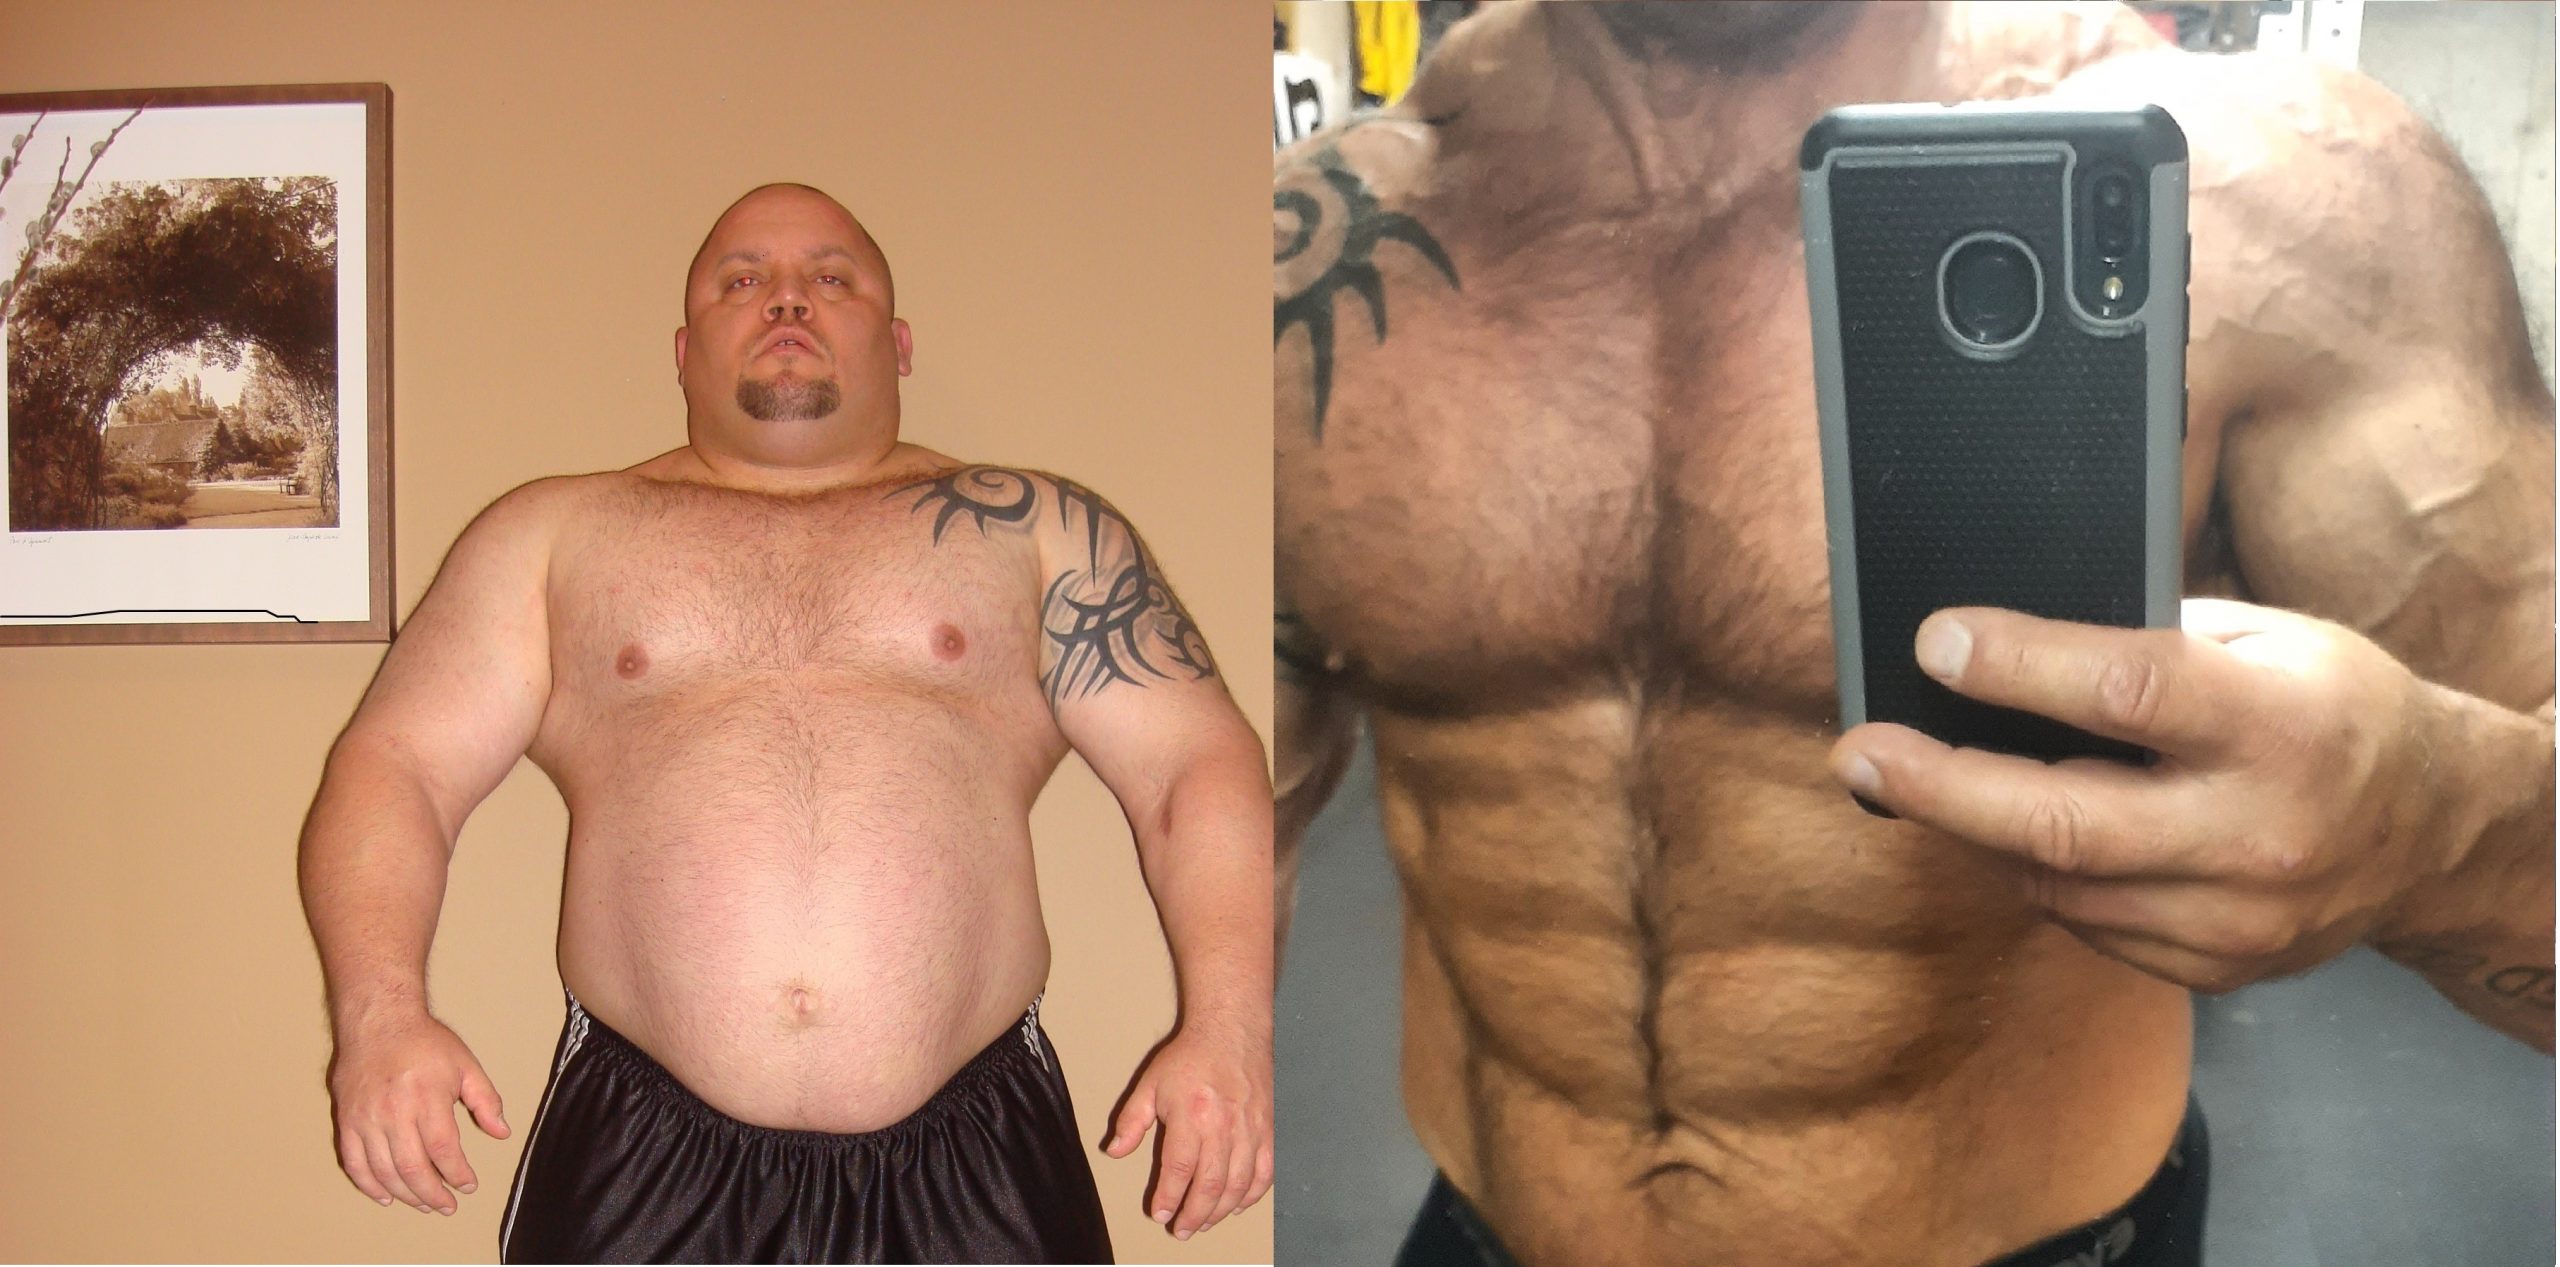 OPERATION BE LESS FAT - The Hard Truth About Fat Loss